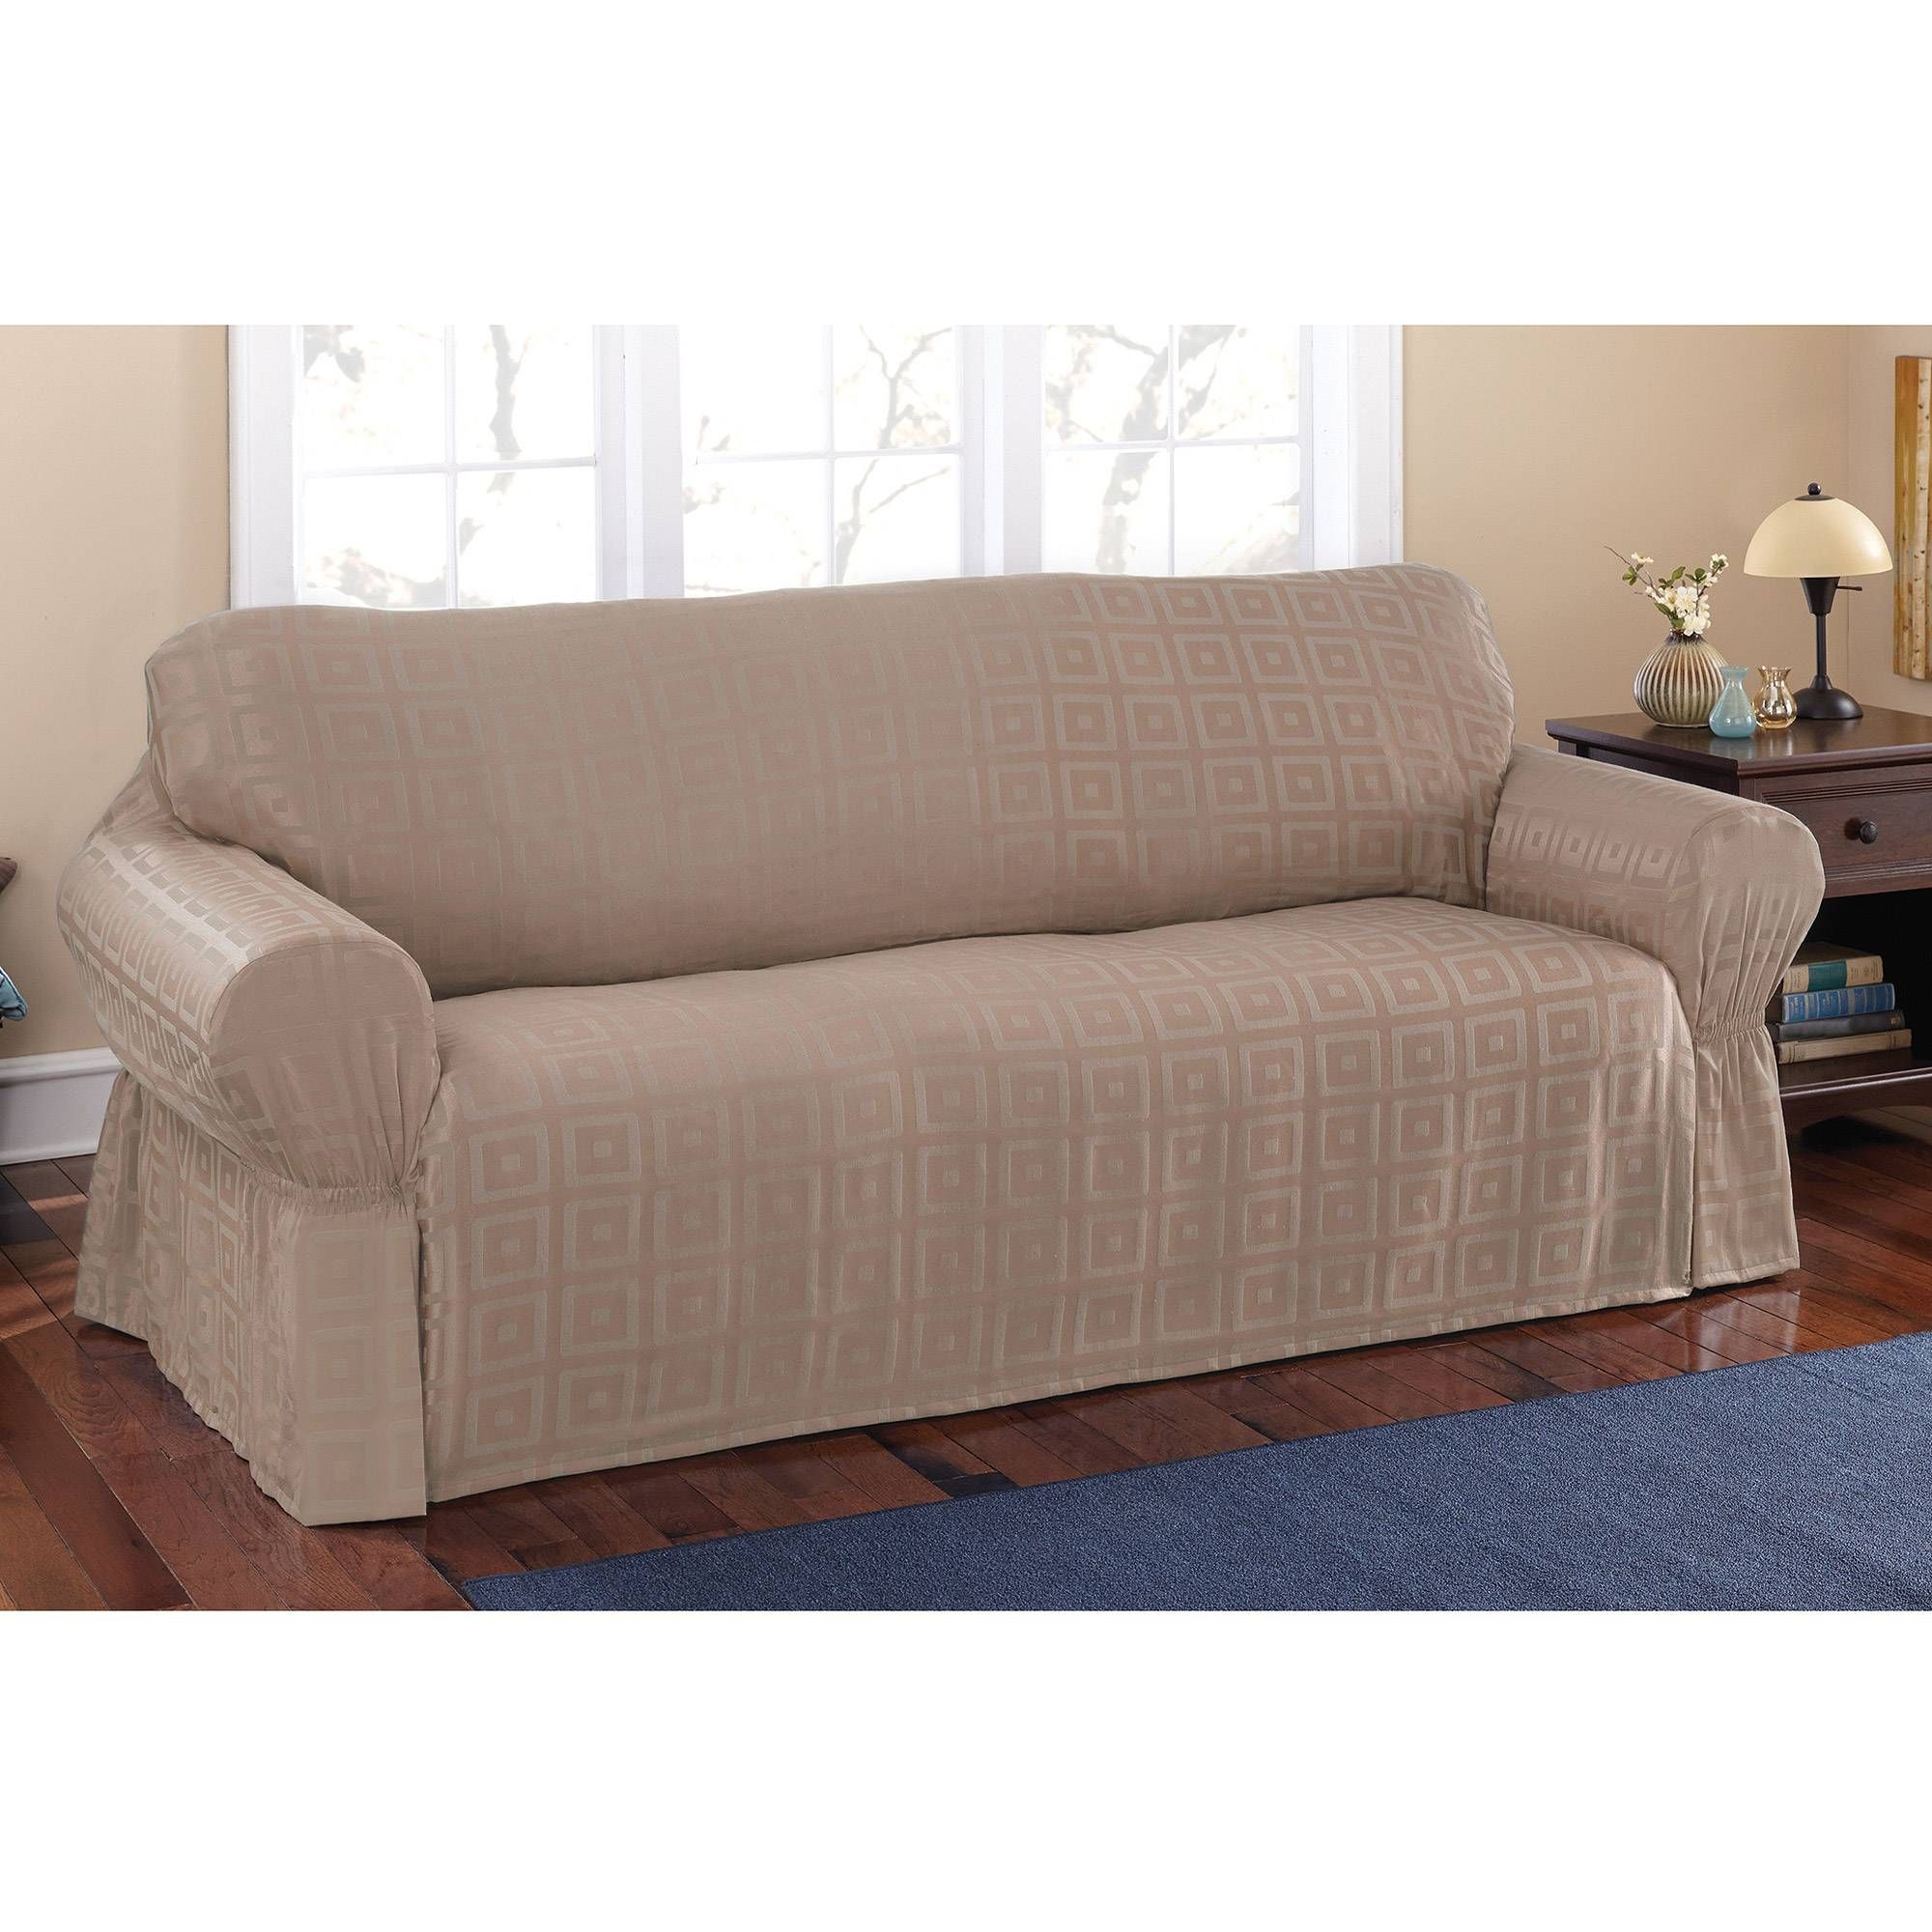 Couch Slipcovers Within Canvas Slipcover Sofas (View 15 of 15)